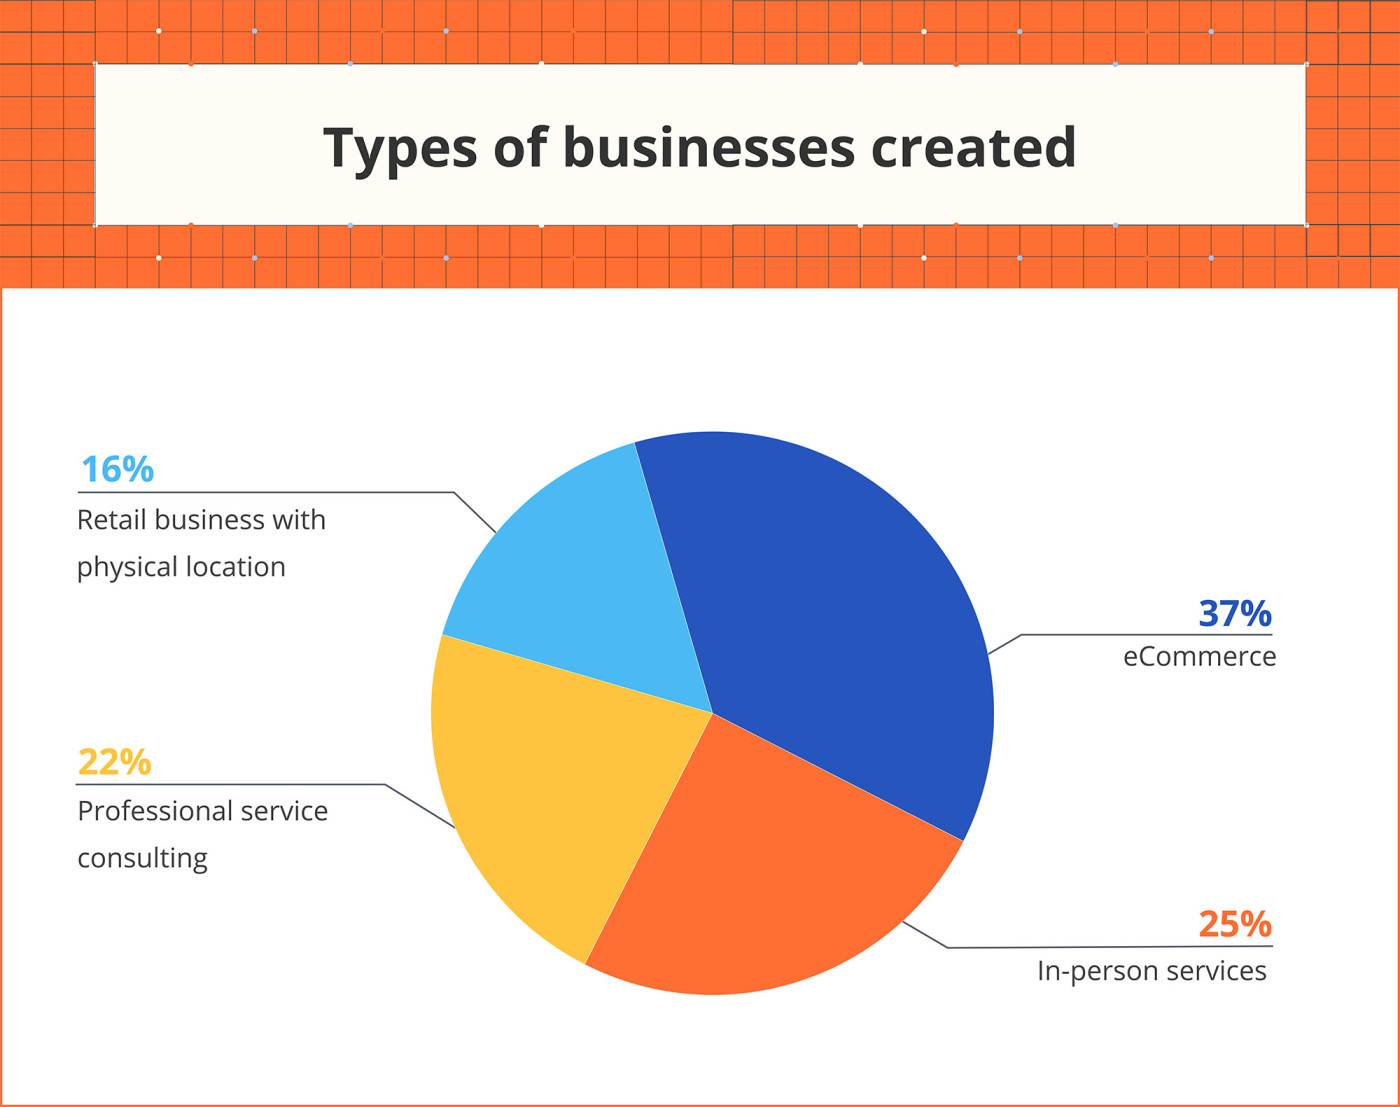 A pie chart showing the types of businesses created during the pandemic, with eCommerce leading at 37%